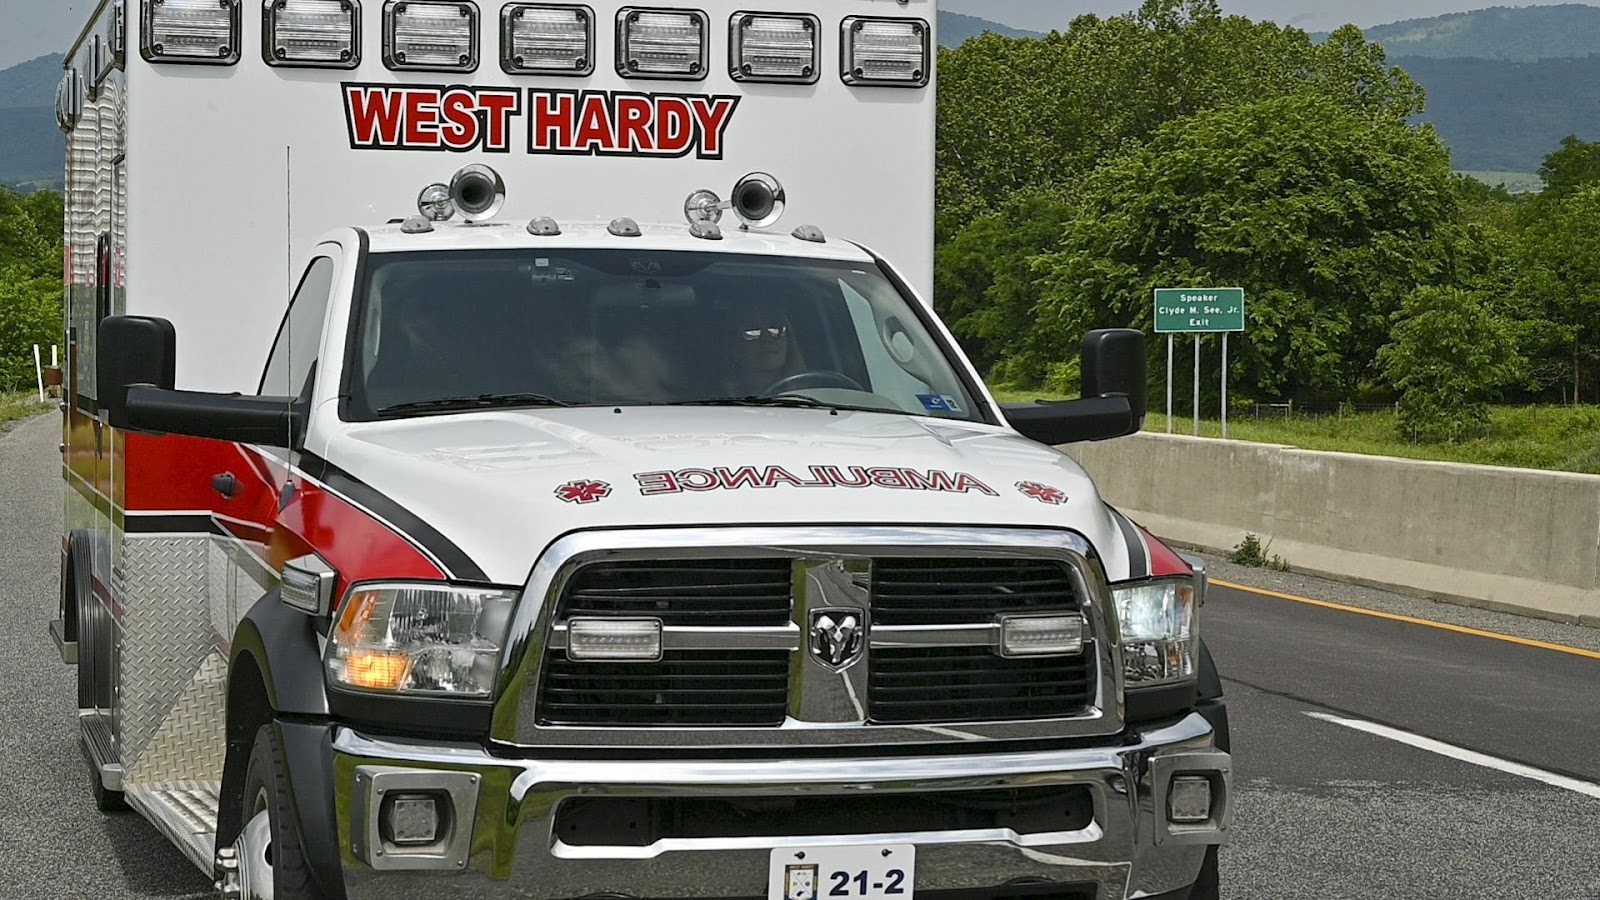 West Hardy EMS: Small Town with Big Heroes